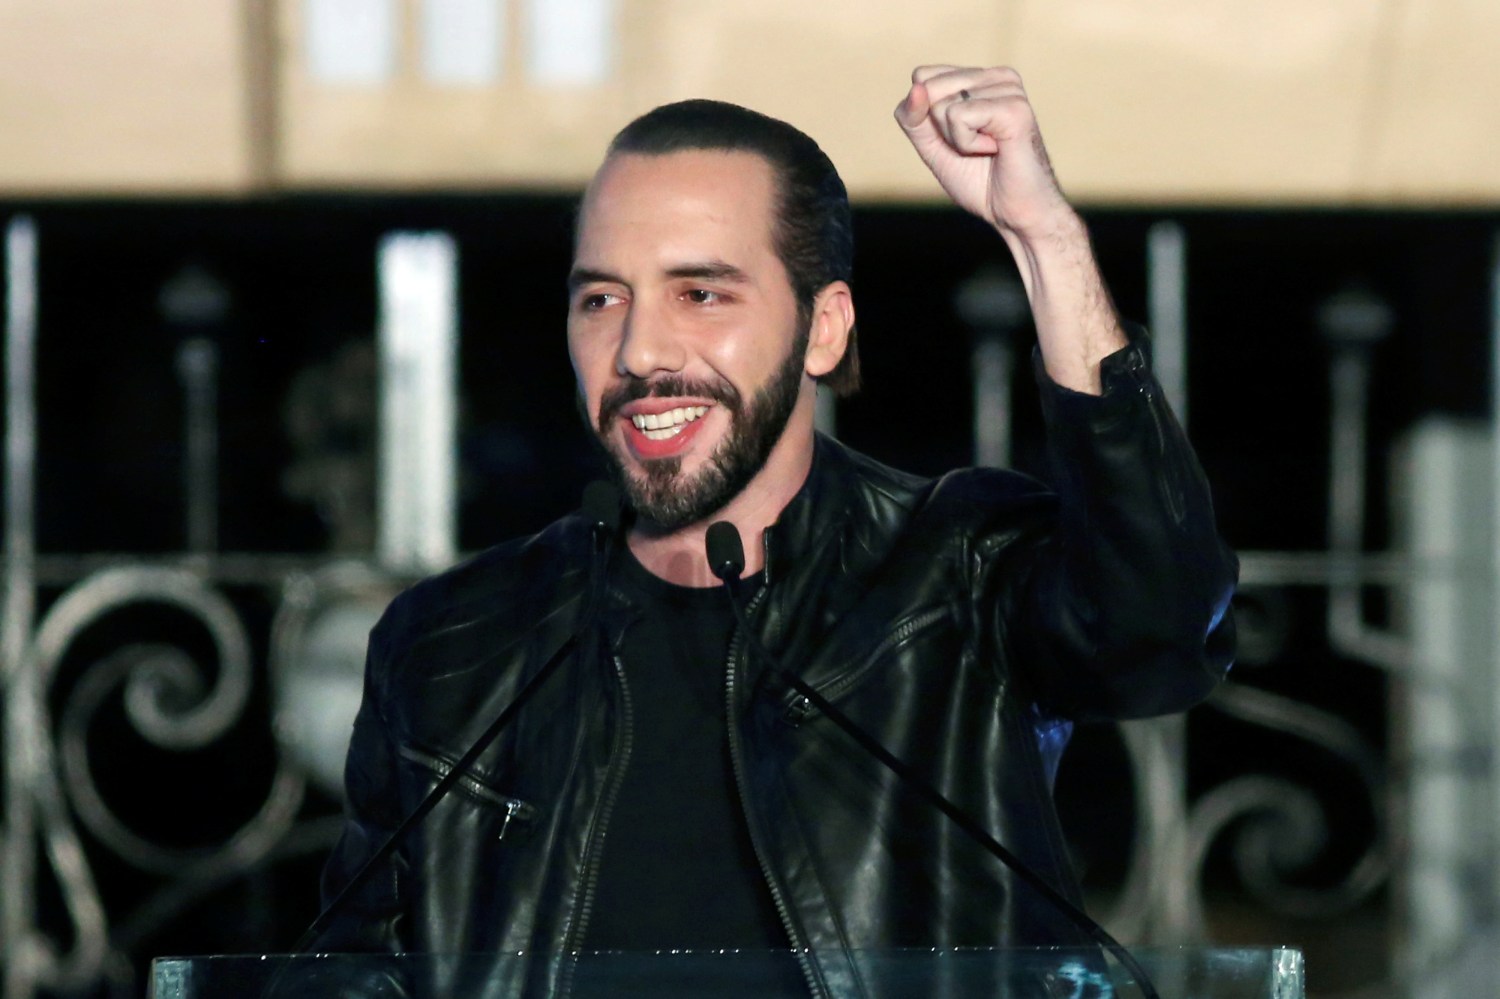 Presidential candidate Nayib Bukele of the Great National Alliance (GANA) gestures to his supporters after official results in downtown San Salvador, El Salvador February 3, 2019. REUTERS/Jose Cabezas - RC1DBAEDEFD0